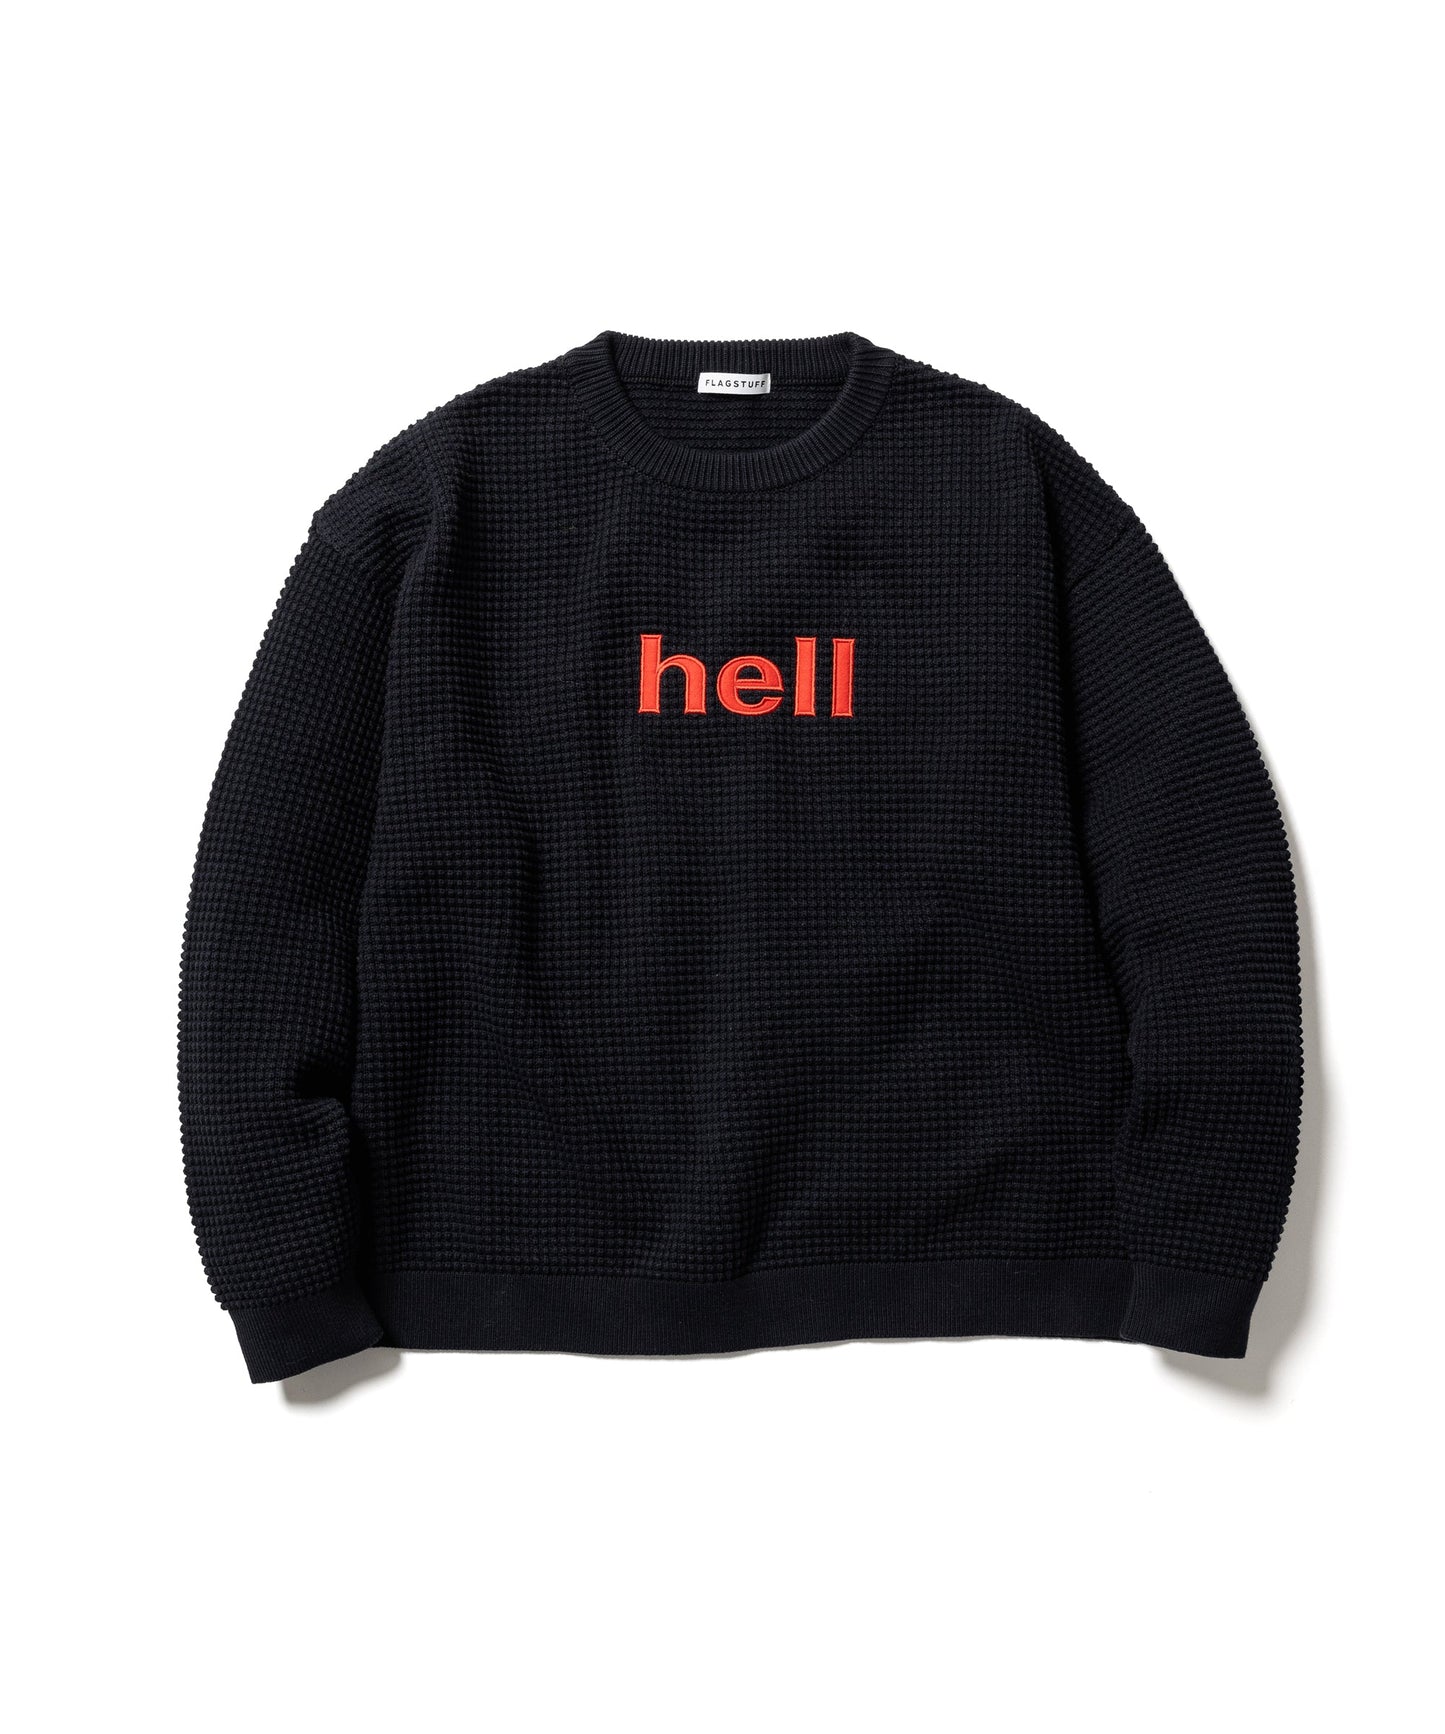 "HELL" SWEATER